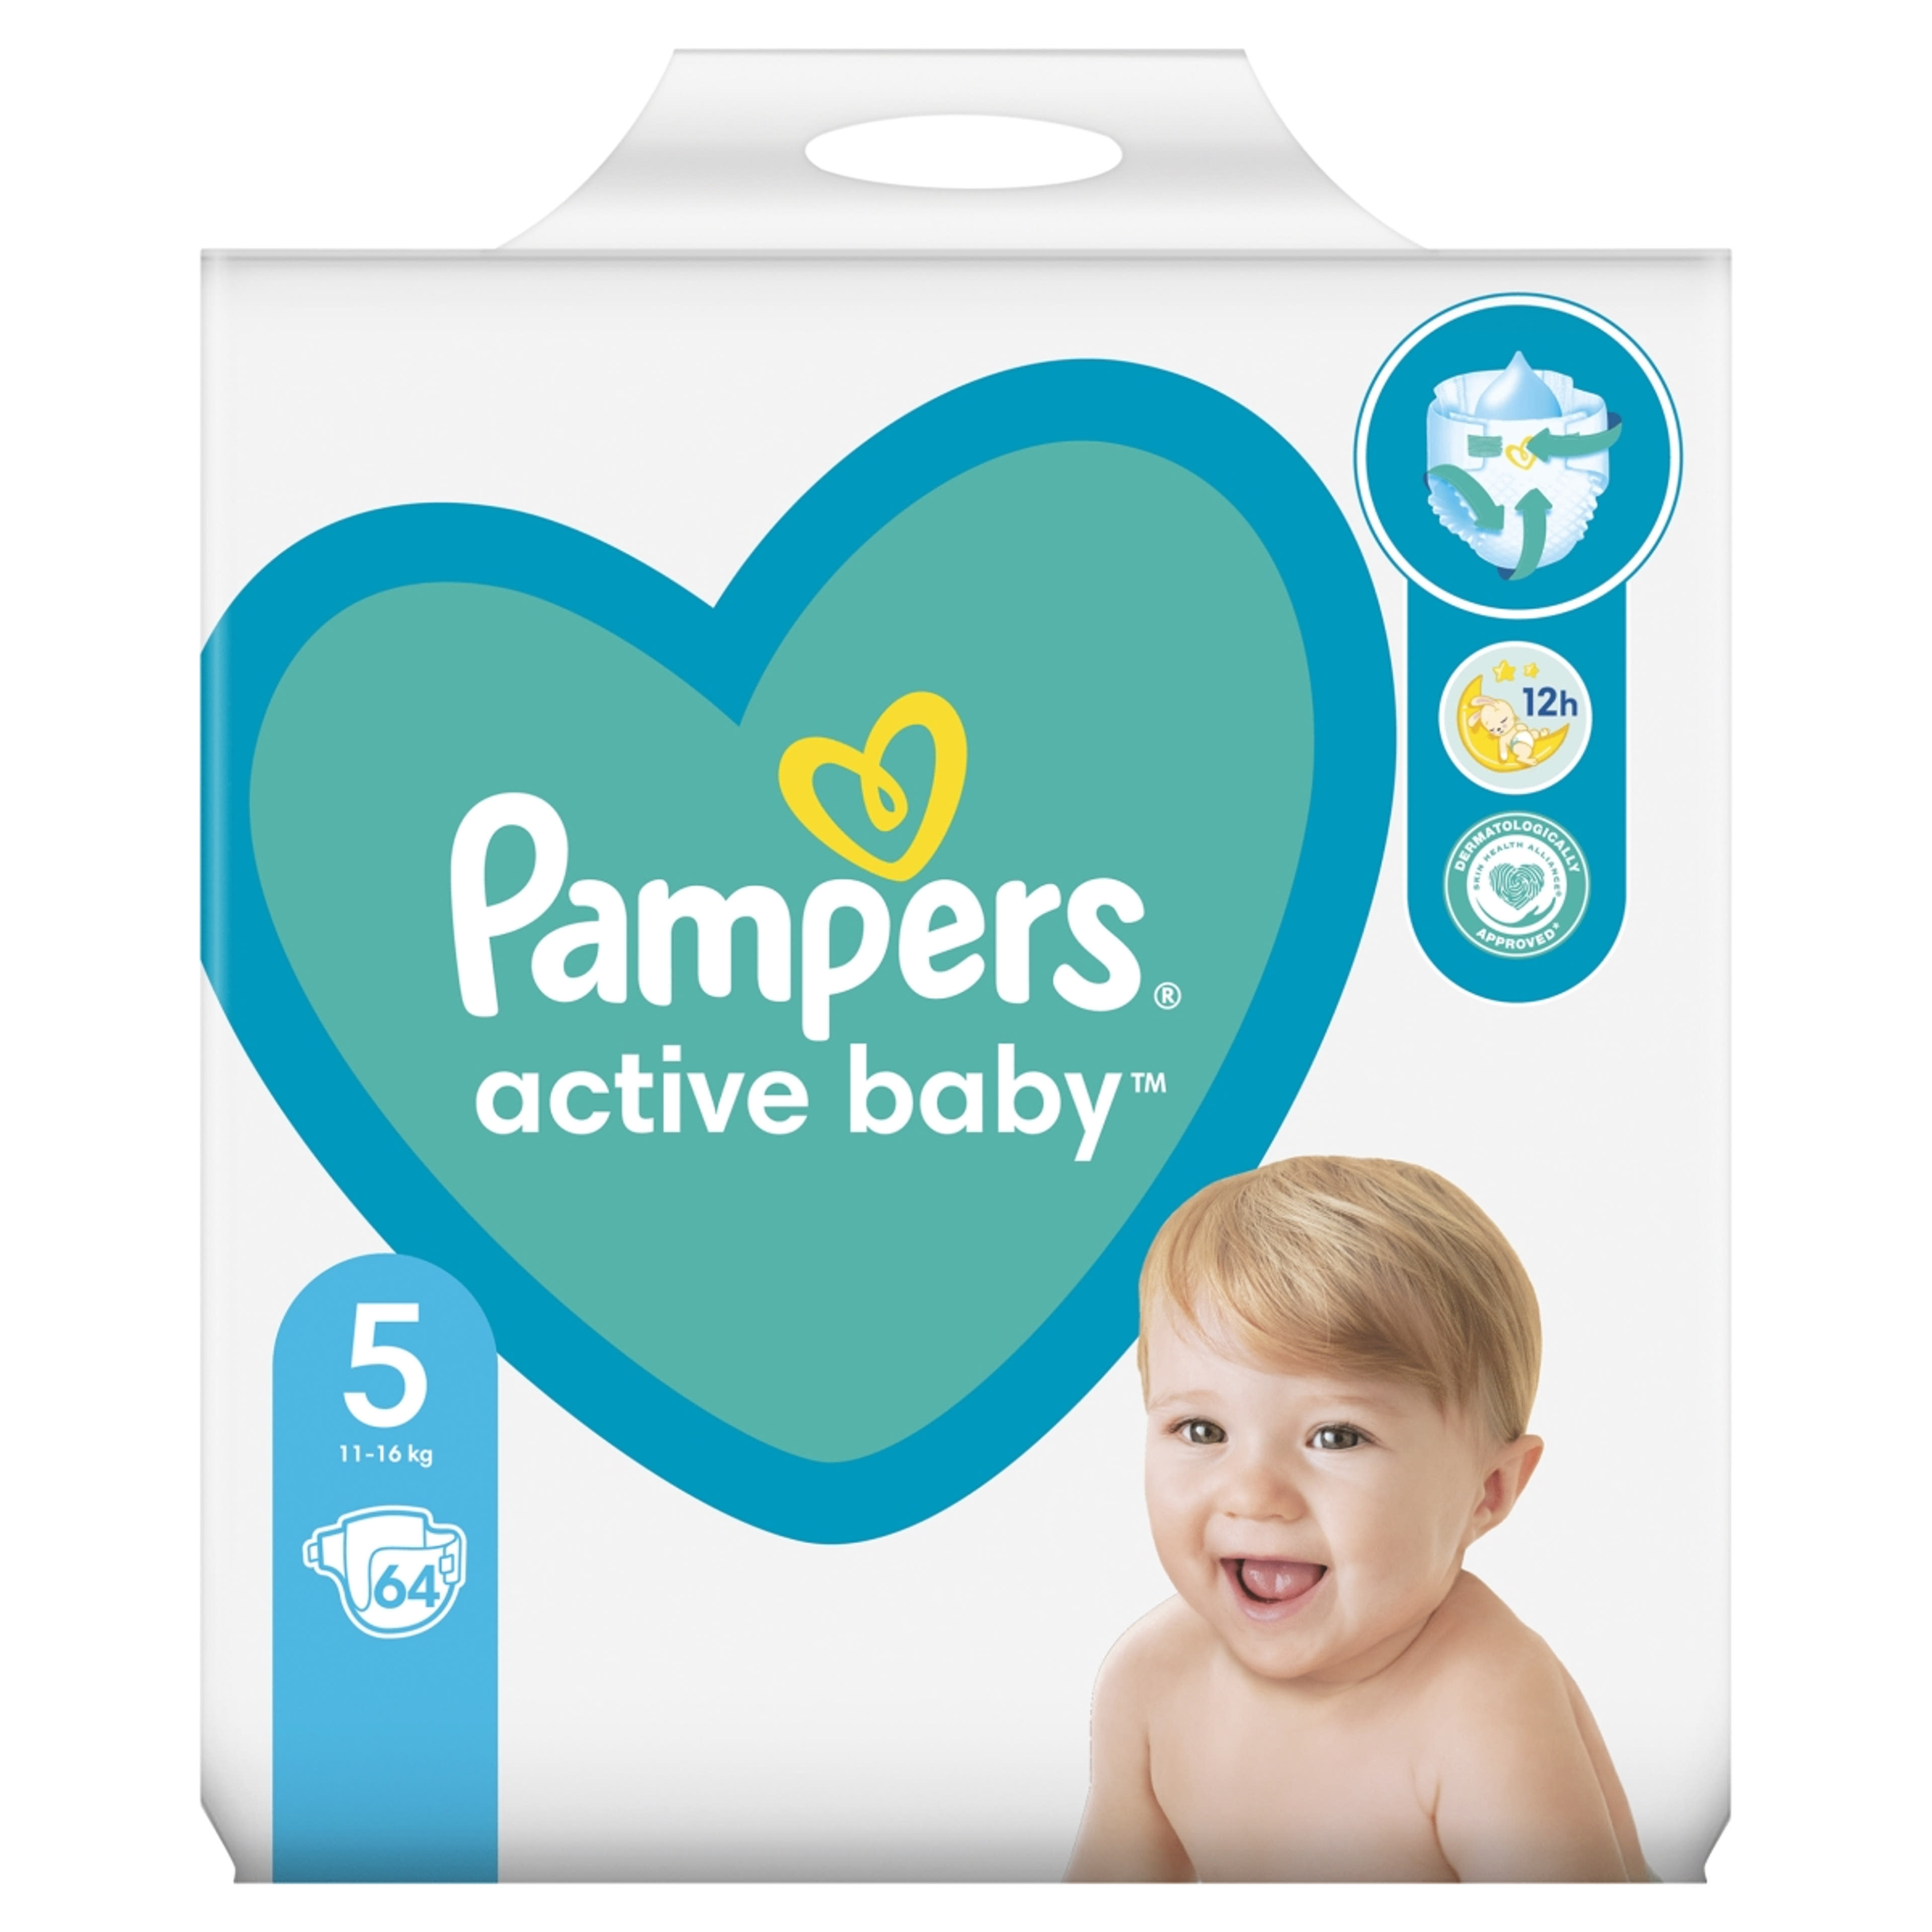 Pampers Active Baby Giant Pack Pelenka 5 - 64 db-1